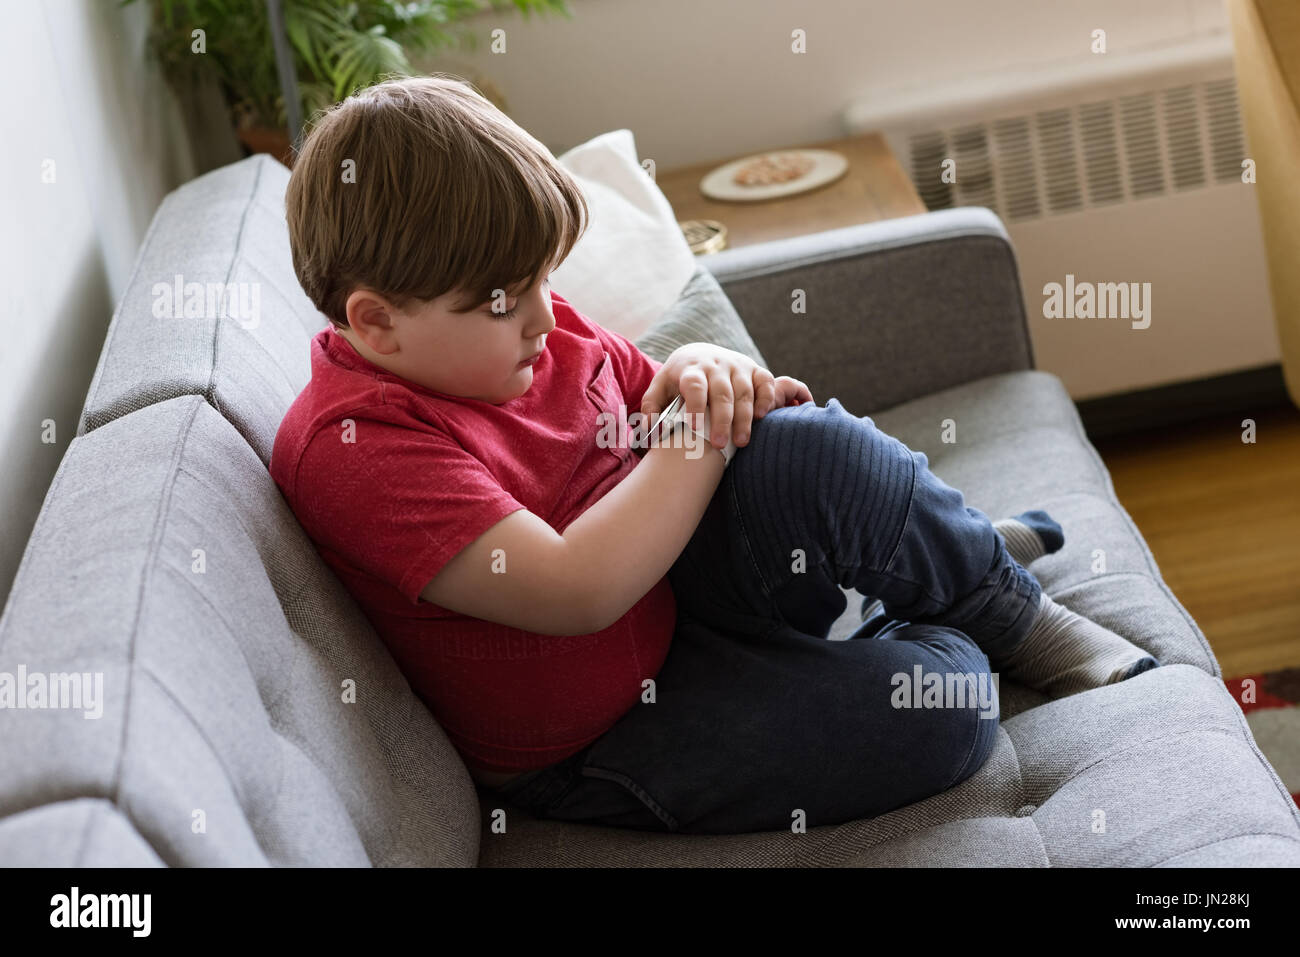 High angle view of boy using smart watch while sitting on sofa at home Stock Photo